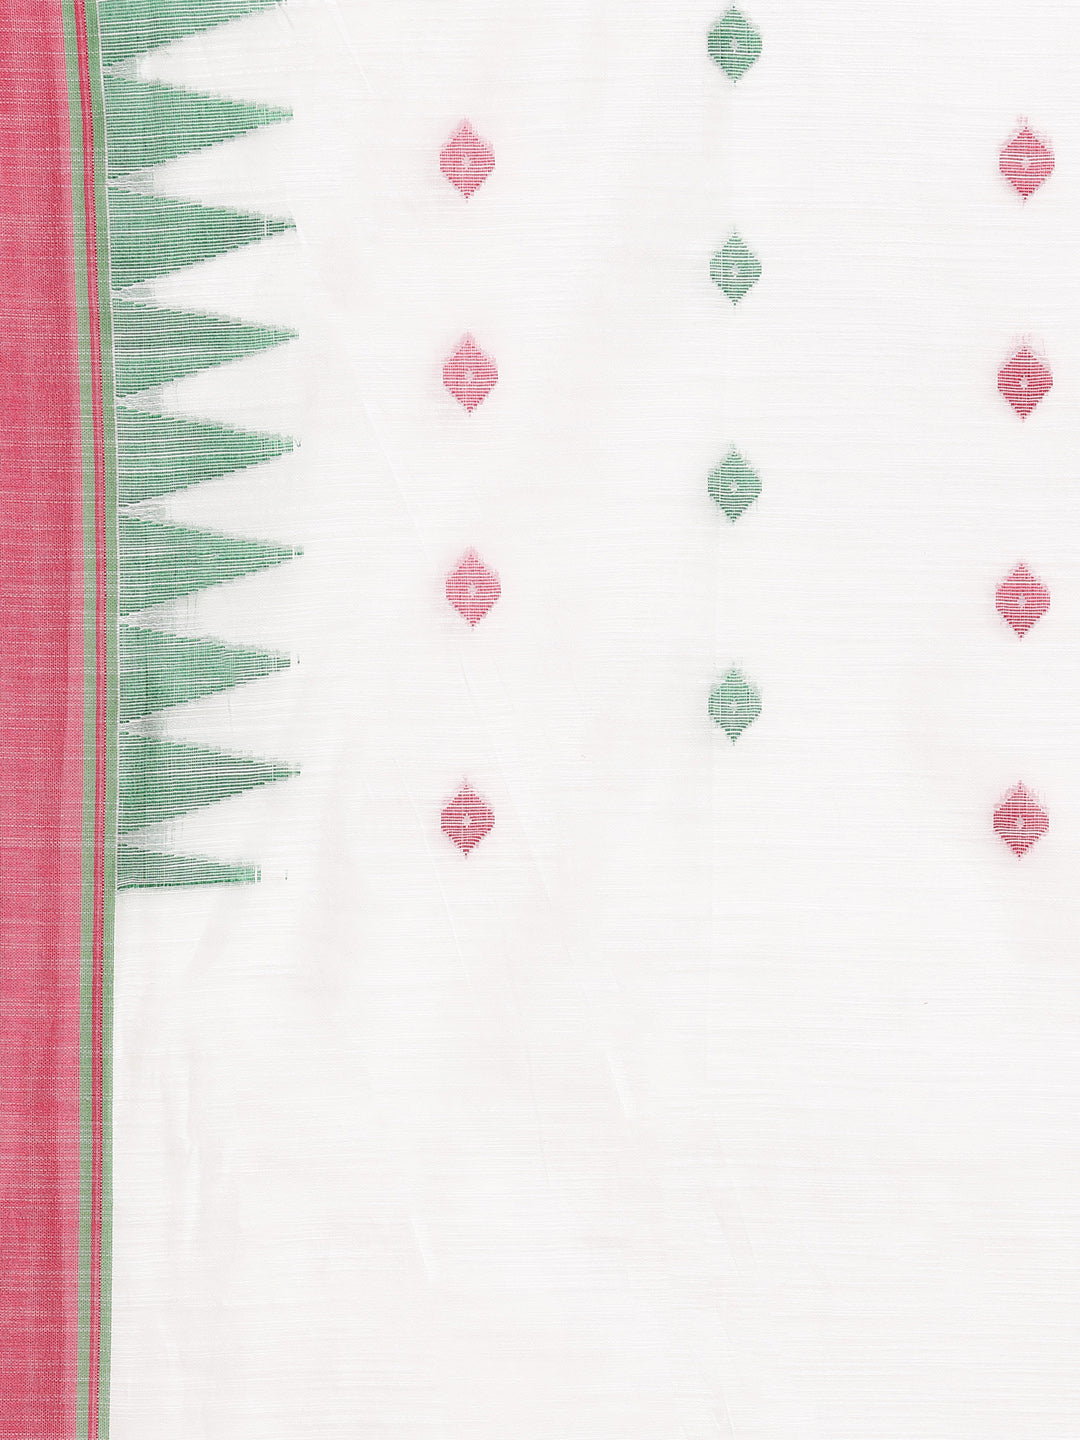 White and Green, Kalakari India Ikat Silk Cotton Woven Design Saree with Blouse SHBESA0044-Saree-Kalakari India-SHBESA0044-Bengal, Cotton, Geographical Indication, Hand Crafted, Heritage Prints, Ikkat, Natural Dyes, Red, Sarees, Sustainable Fabrics, Woven, Yellow-[Linen,Ethnic,wear,Fashionista,Handloom,Handicraft,Indigo,blockprint,block,print,Cotton,Chanderi,Blue, latest,classy,party,bollywood,trendy,summer,style,traditional,formal,elegant,unique,style,hand,block,print, dabu,booti,gift,present,g